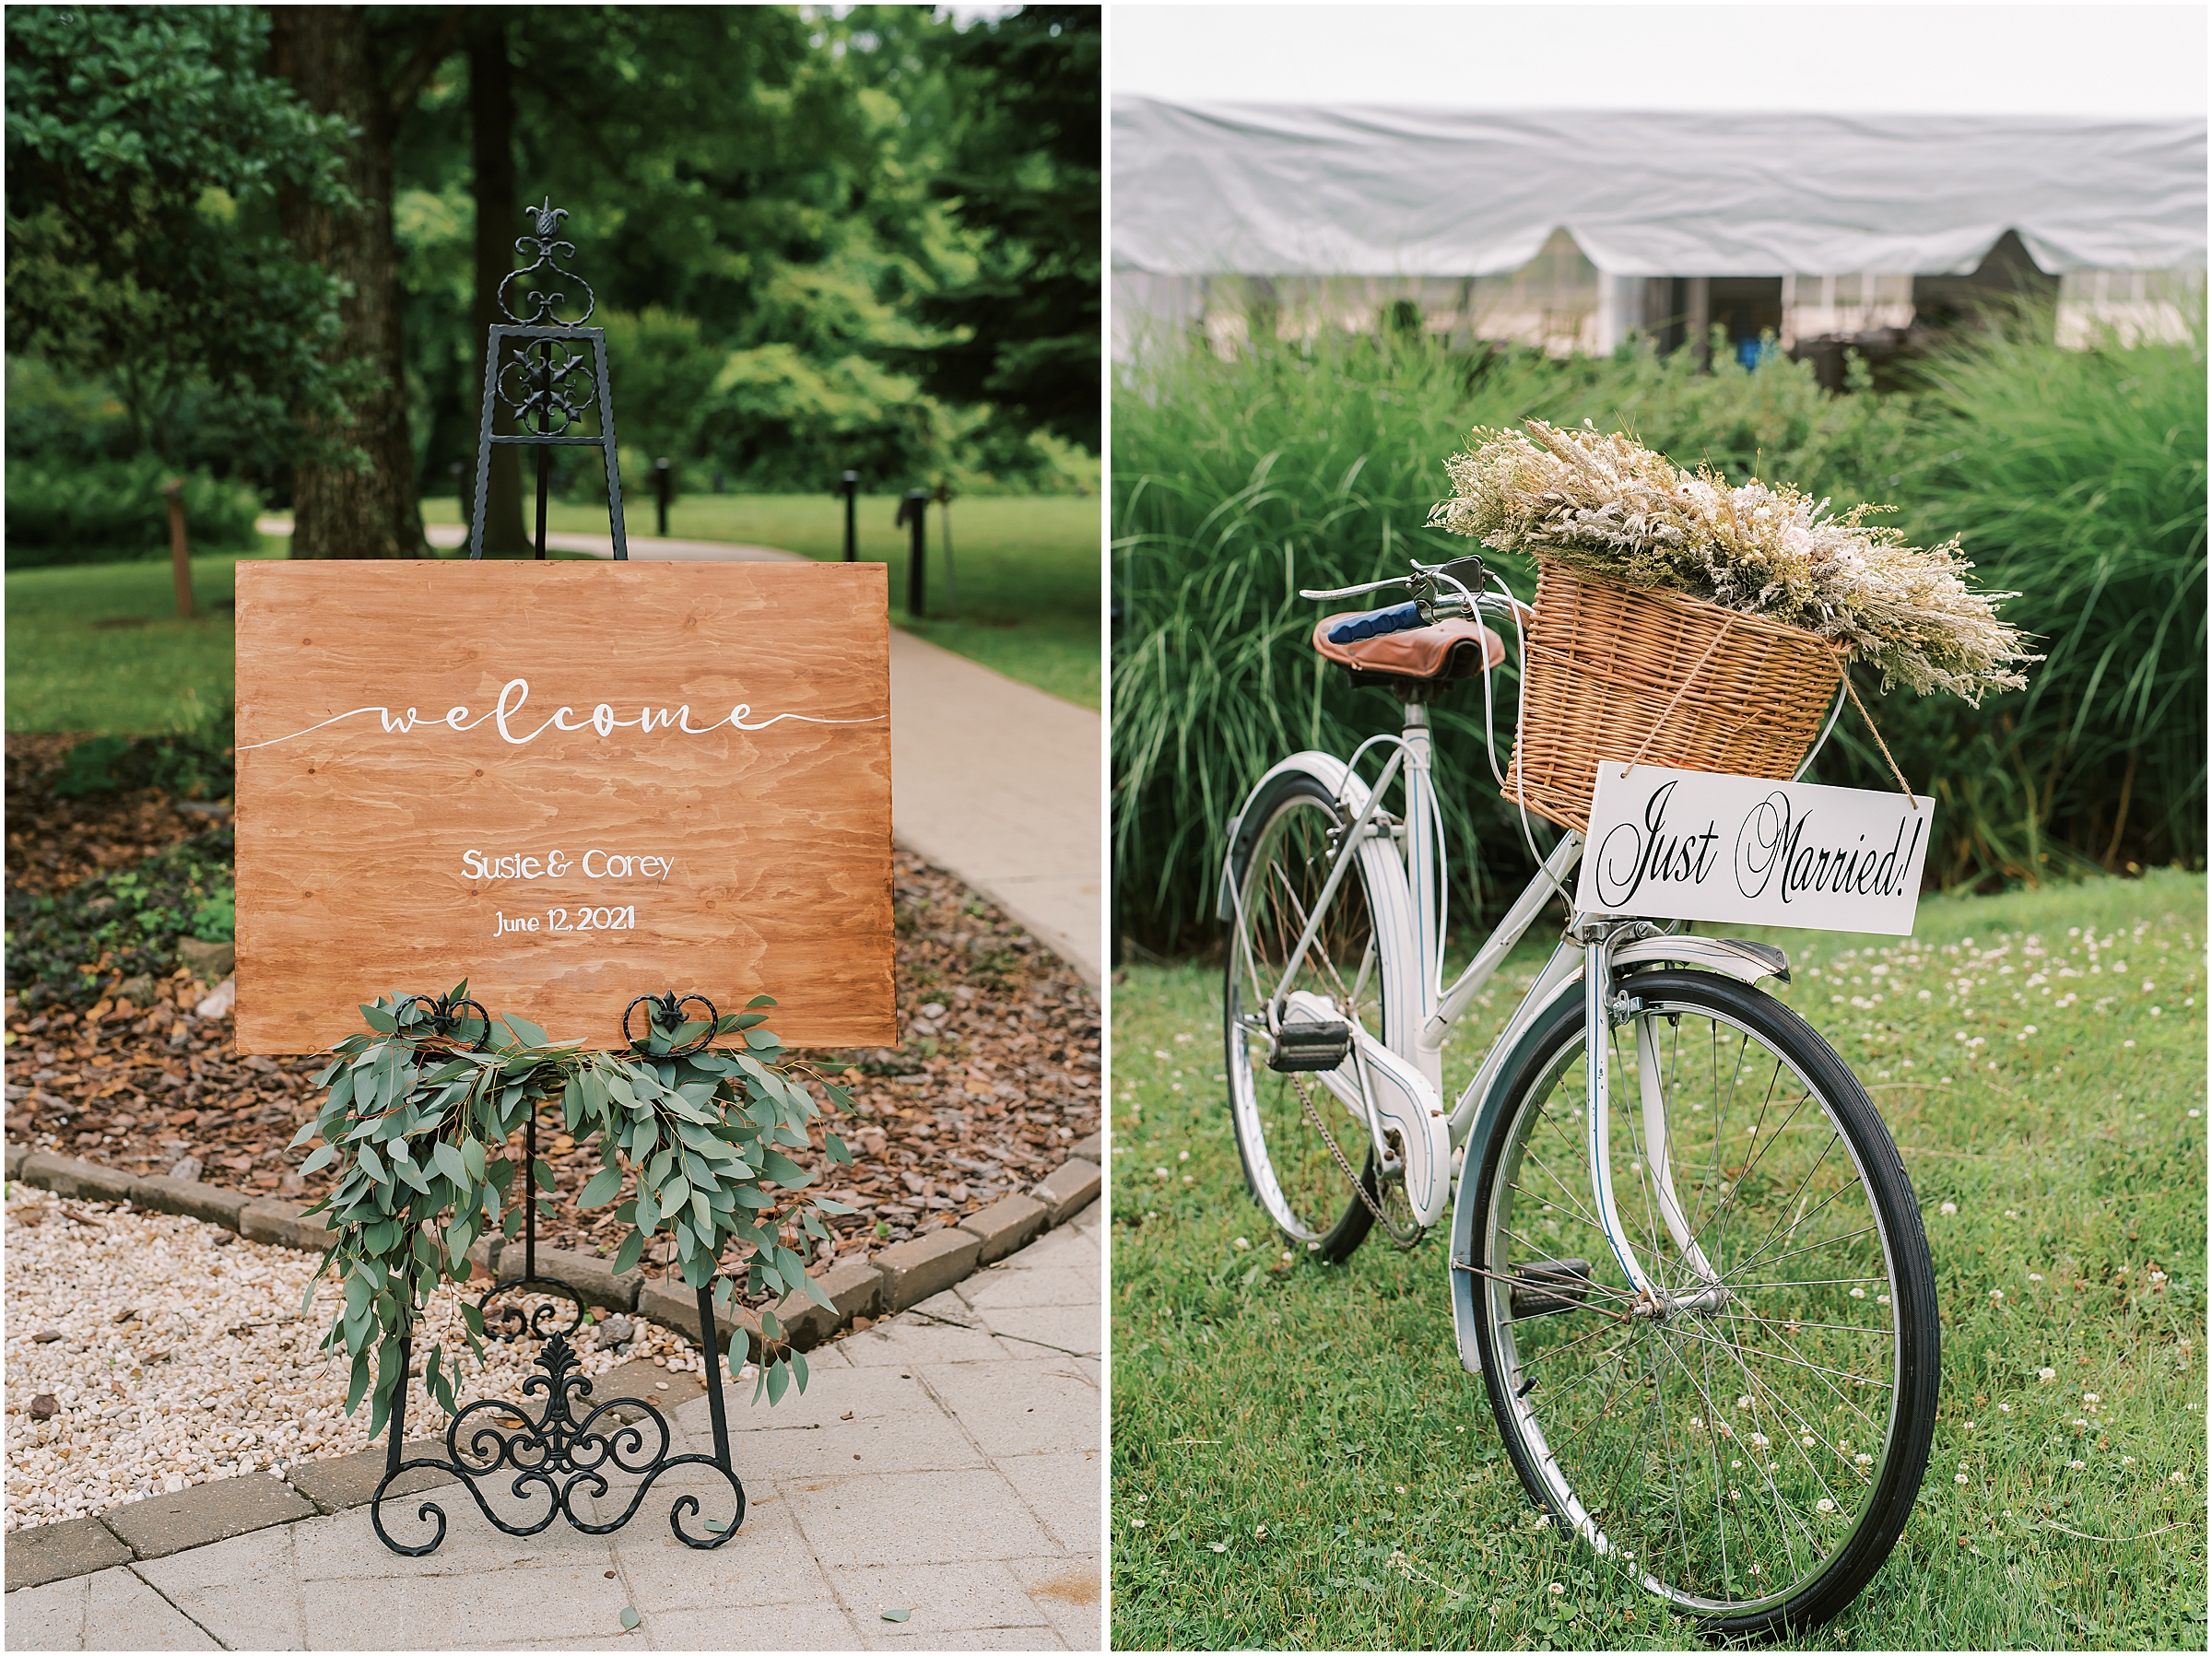 Wedding welcome sign and bicycle